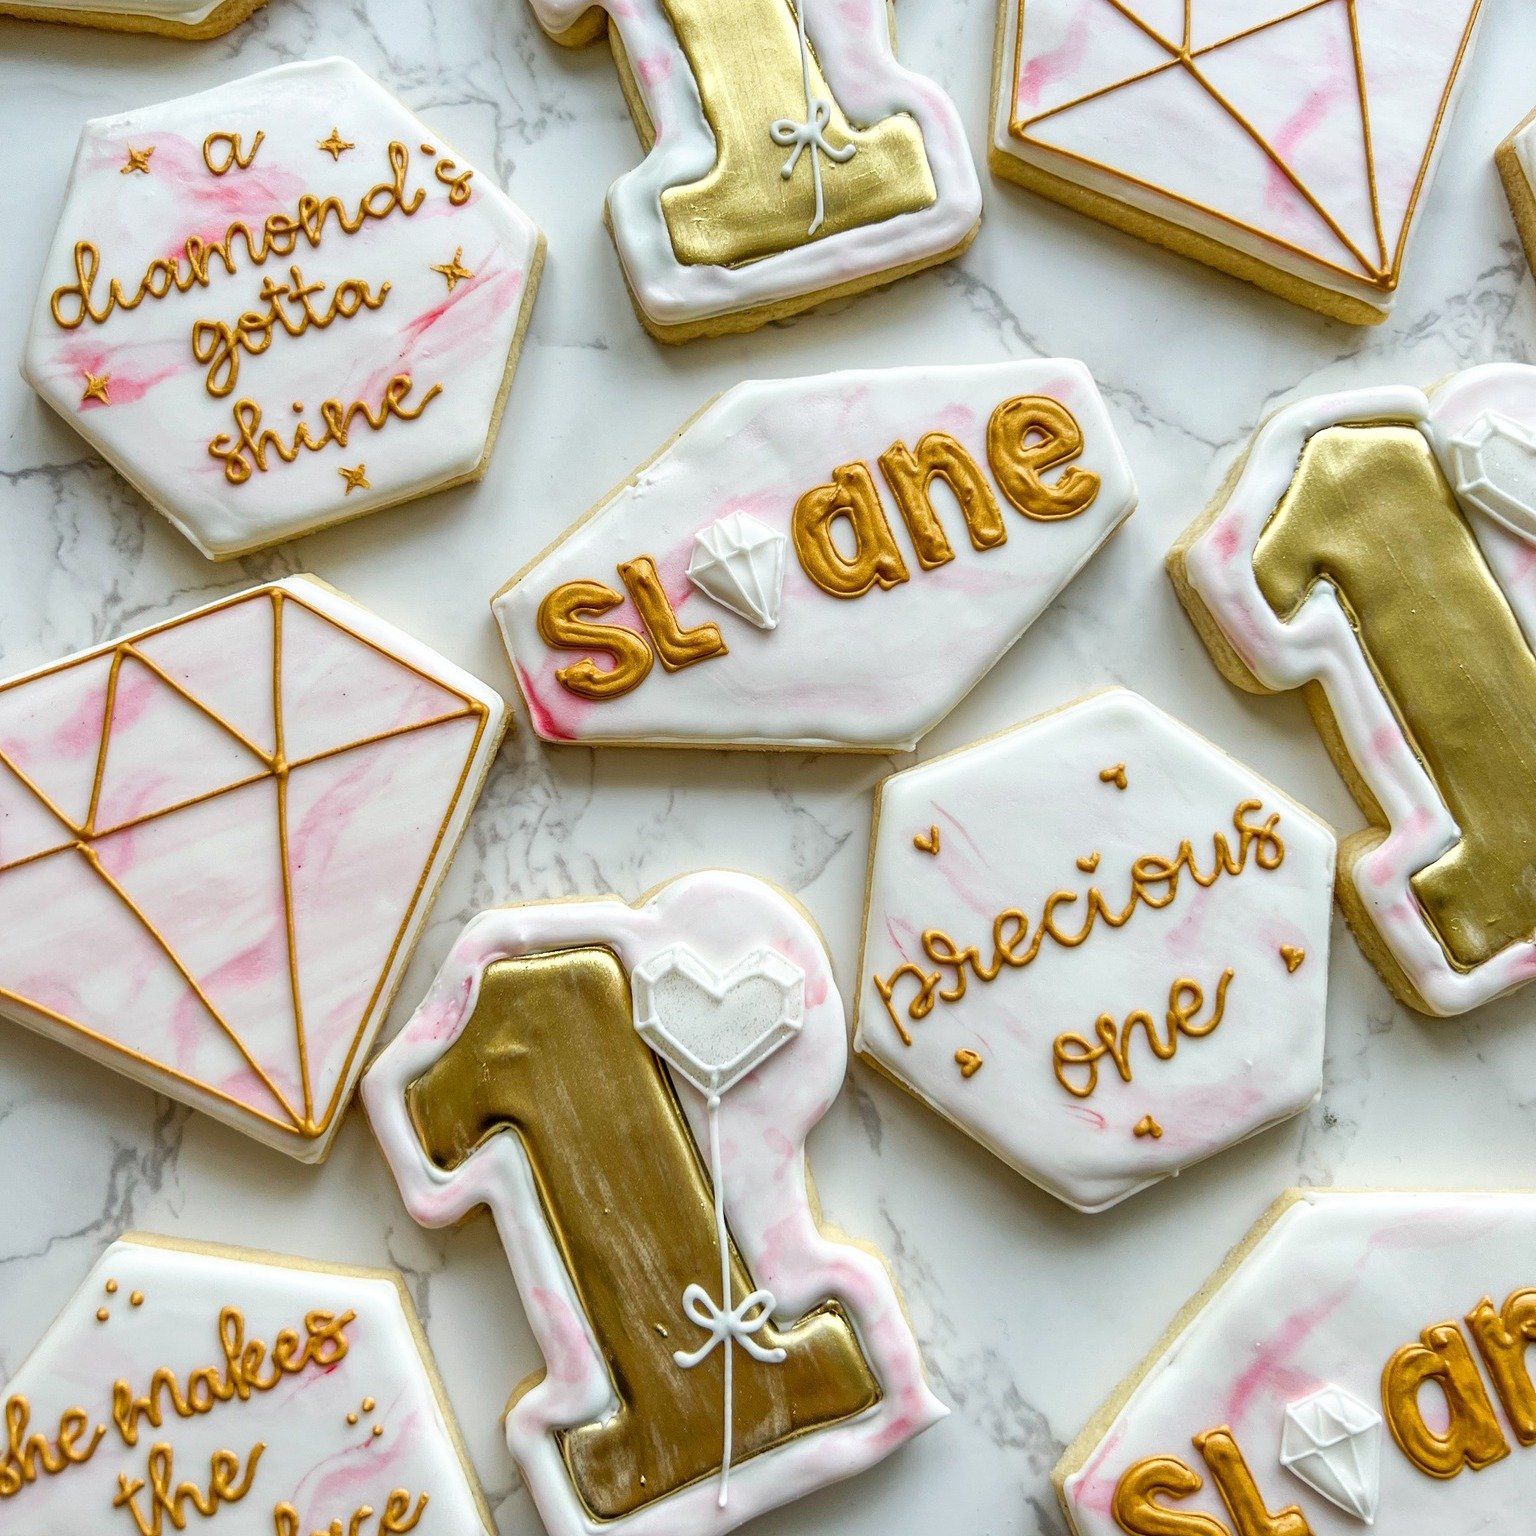 ✨ She makes the whole place shimmer! Happy birthday Sloane! ✨
&bull;
🇮🇱 My heart is always with the people of Israel 🇮🇱 #amyisraelchai #stopjewhate #bringthemhome
&bull;
#Sweetsbymichelle #sweets #desserts #cookies #customcookies #sugarcookies #s